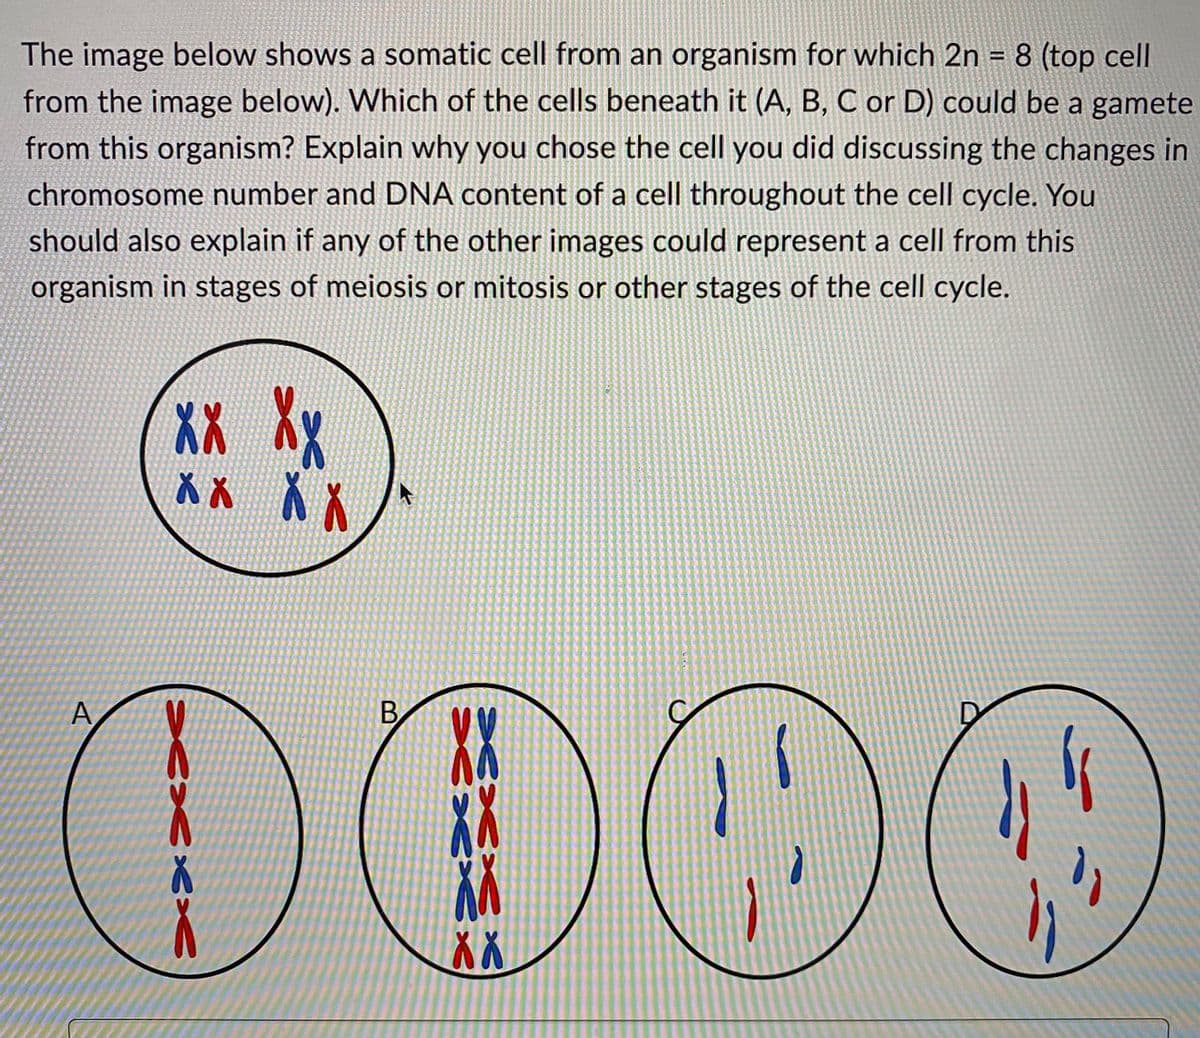 The image below shows a somatic cell from an organism for which 2n = 8 (top cell
from the image below). Which of the cells beneath it (A, B, C or D) could be a gamete
from this organism? Explain why you chose the cell you did discussing the changes in
chromosome number and DNA content of a cell throughout the cell cycle. You
should also explain if any of the other images could represent a cell from this
organism in stages of meiosis or mitosis or other stages of the cell cycle.
XX Xx
XX XX
B
VV
K
OC
"₁
X X
A
Xxxx
Sexxx